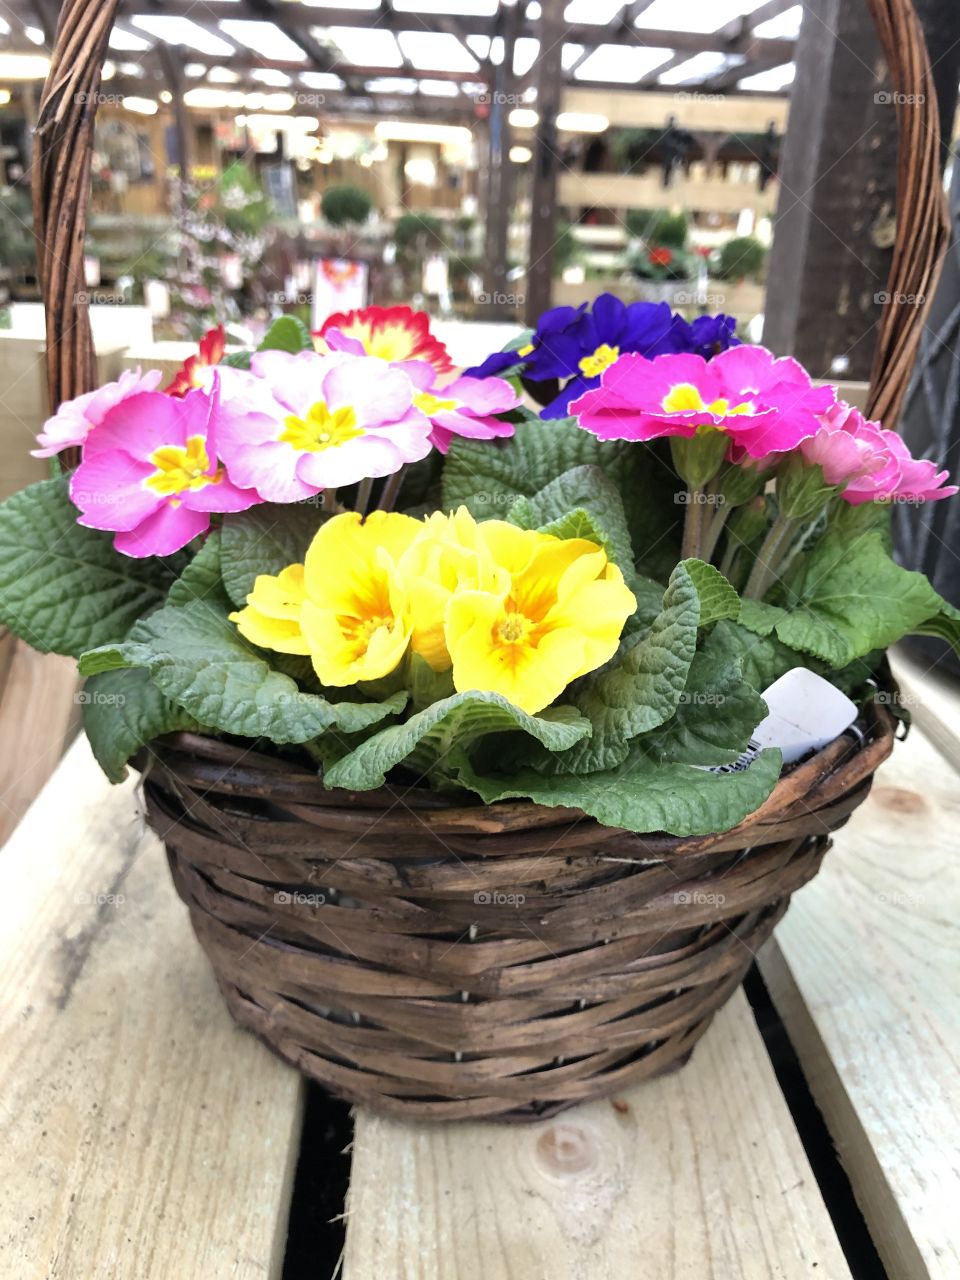 Love this hanging basket of primroses, as the blooms are wonderfully large in size and give a brilliant display for us.